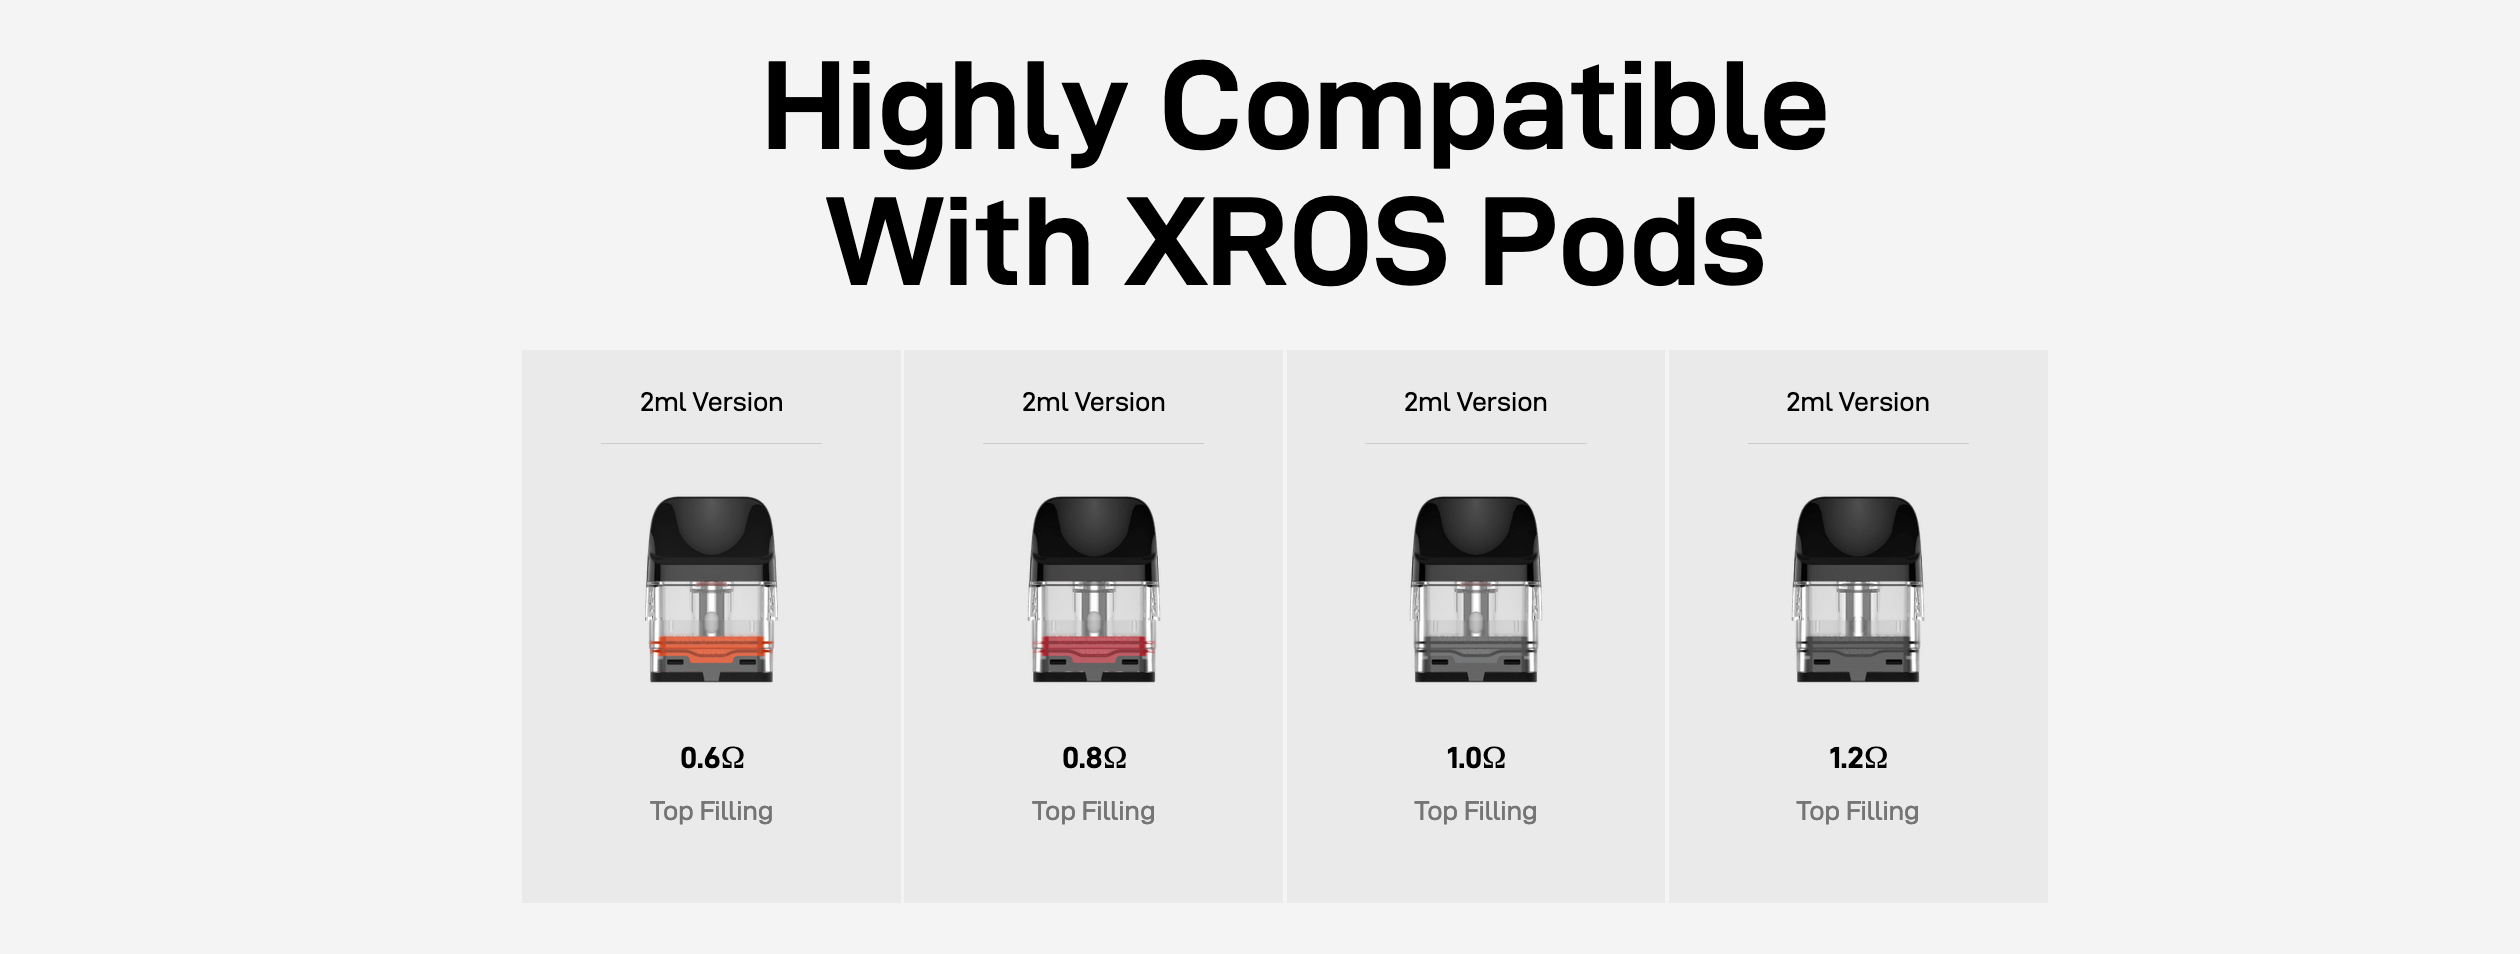 Vaporesso Xros Cube Vape Kit - Highly Compatible with Xros Pods - 0.6ohm, 0.8ohm, 1.0ohm and 1.2ohm